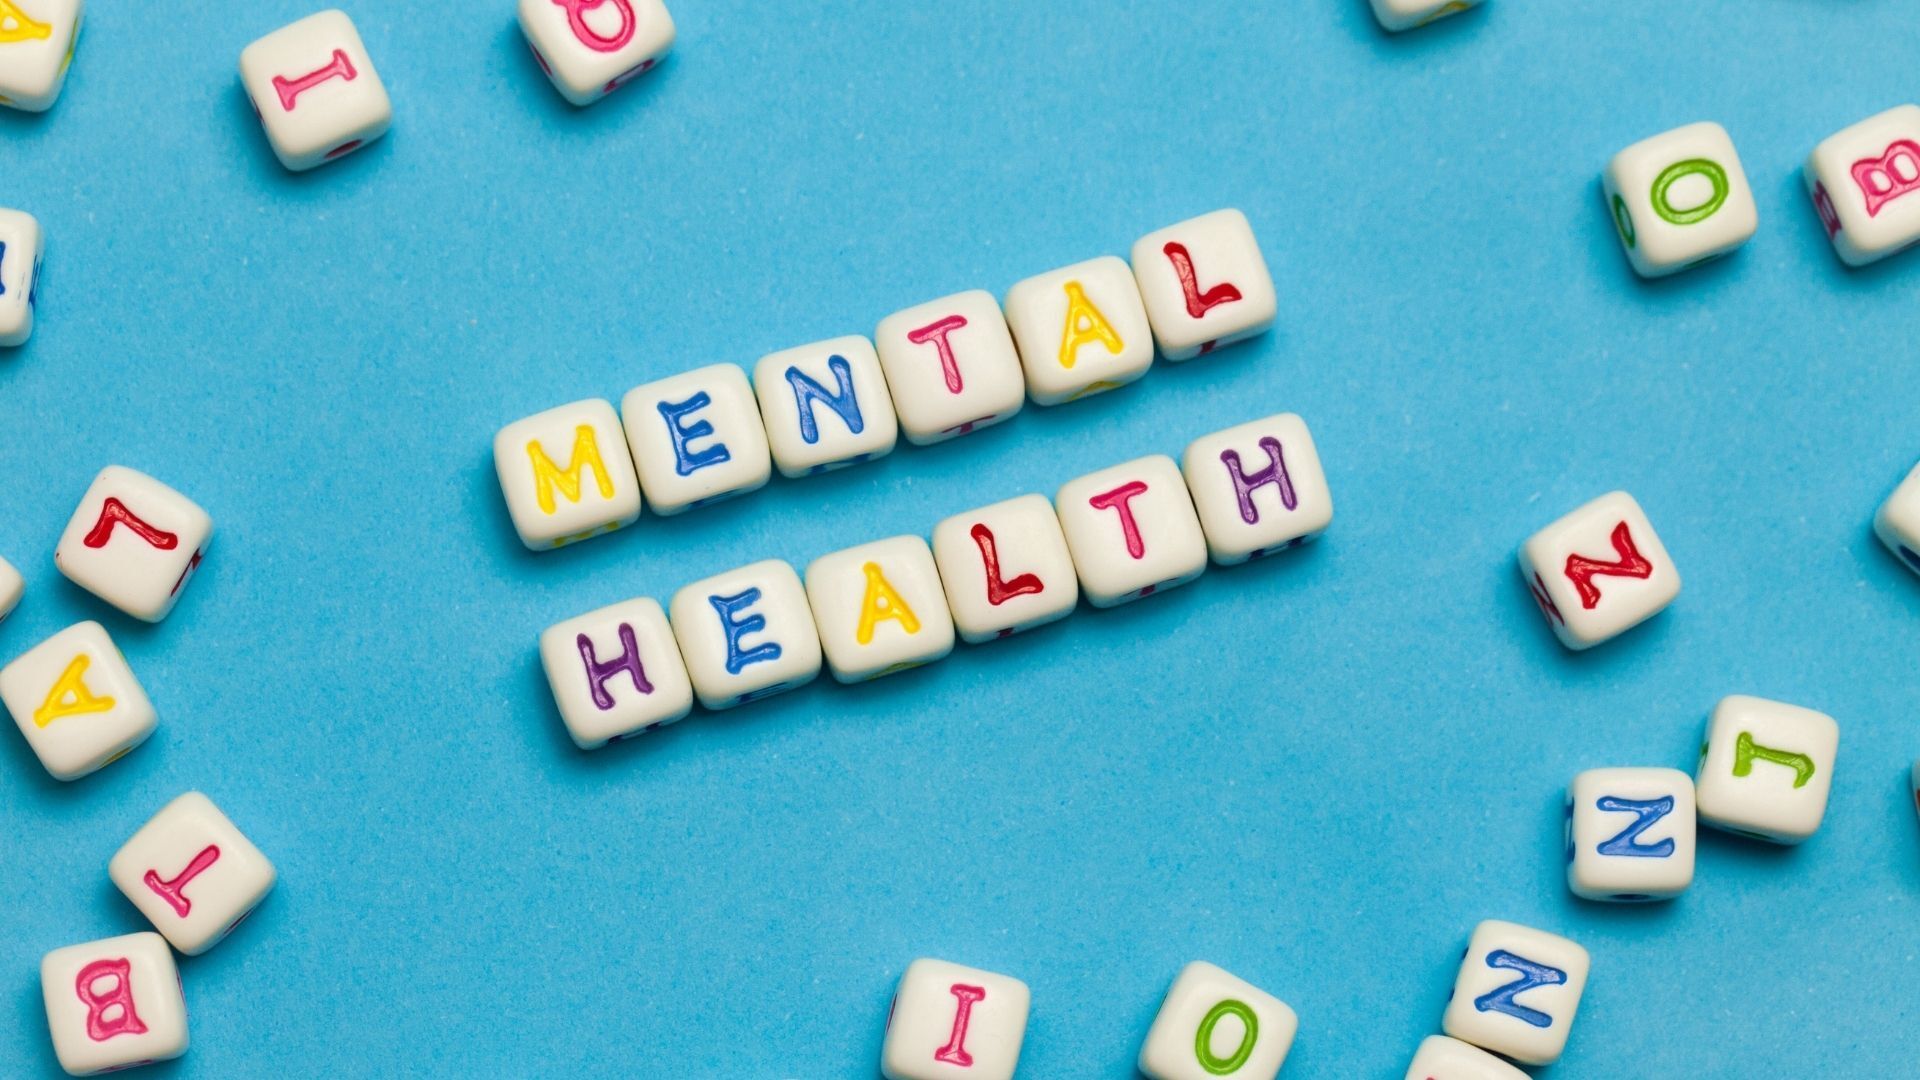 Helping Your Child Look After Their Mental Health